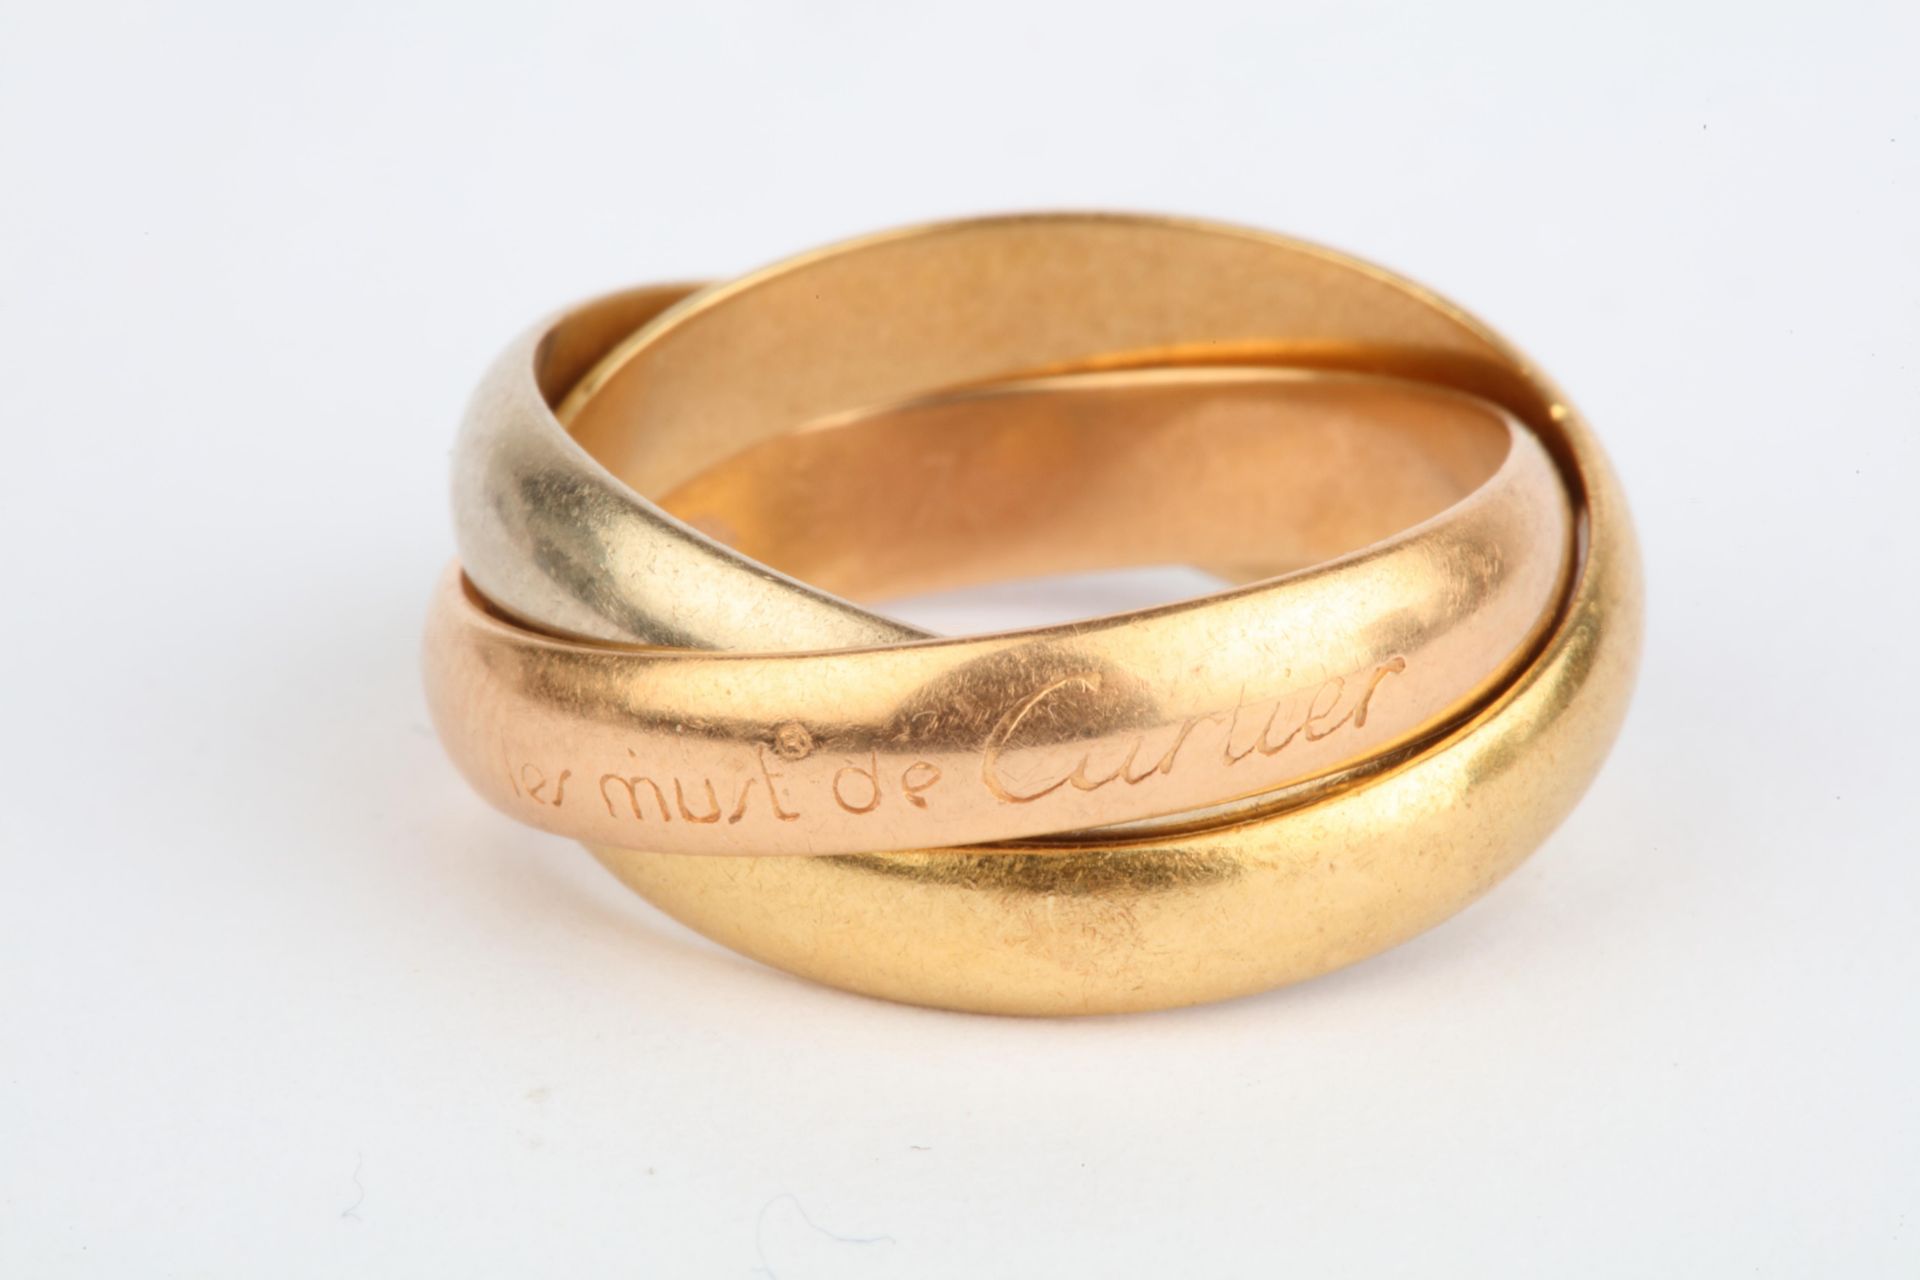 No VAT Cartier Tri Gold Trinity Ring With 18k Yellow Gold, White Gold And Rose Gold - Image 2 of 2